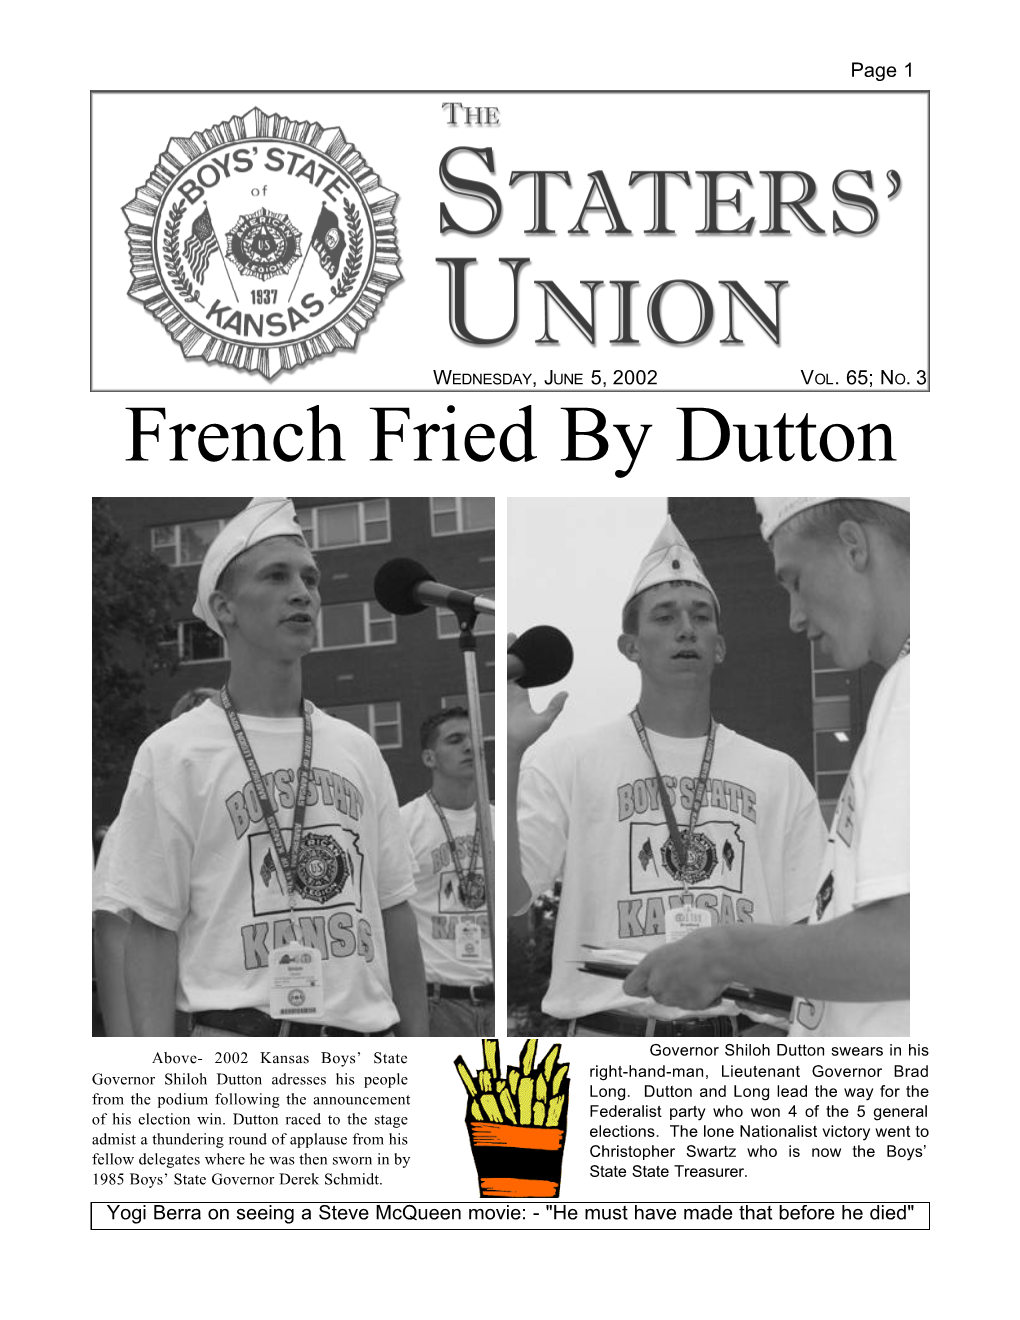 French Fried by Dutton